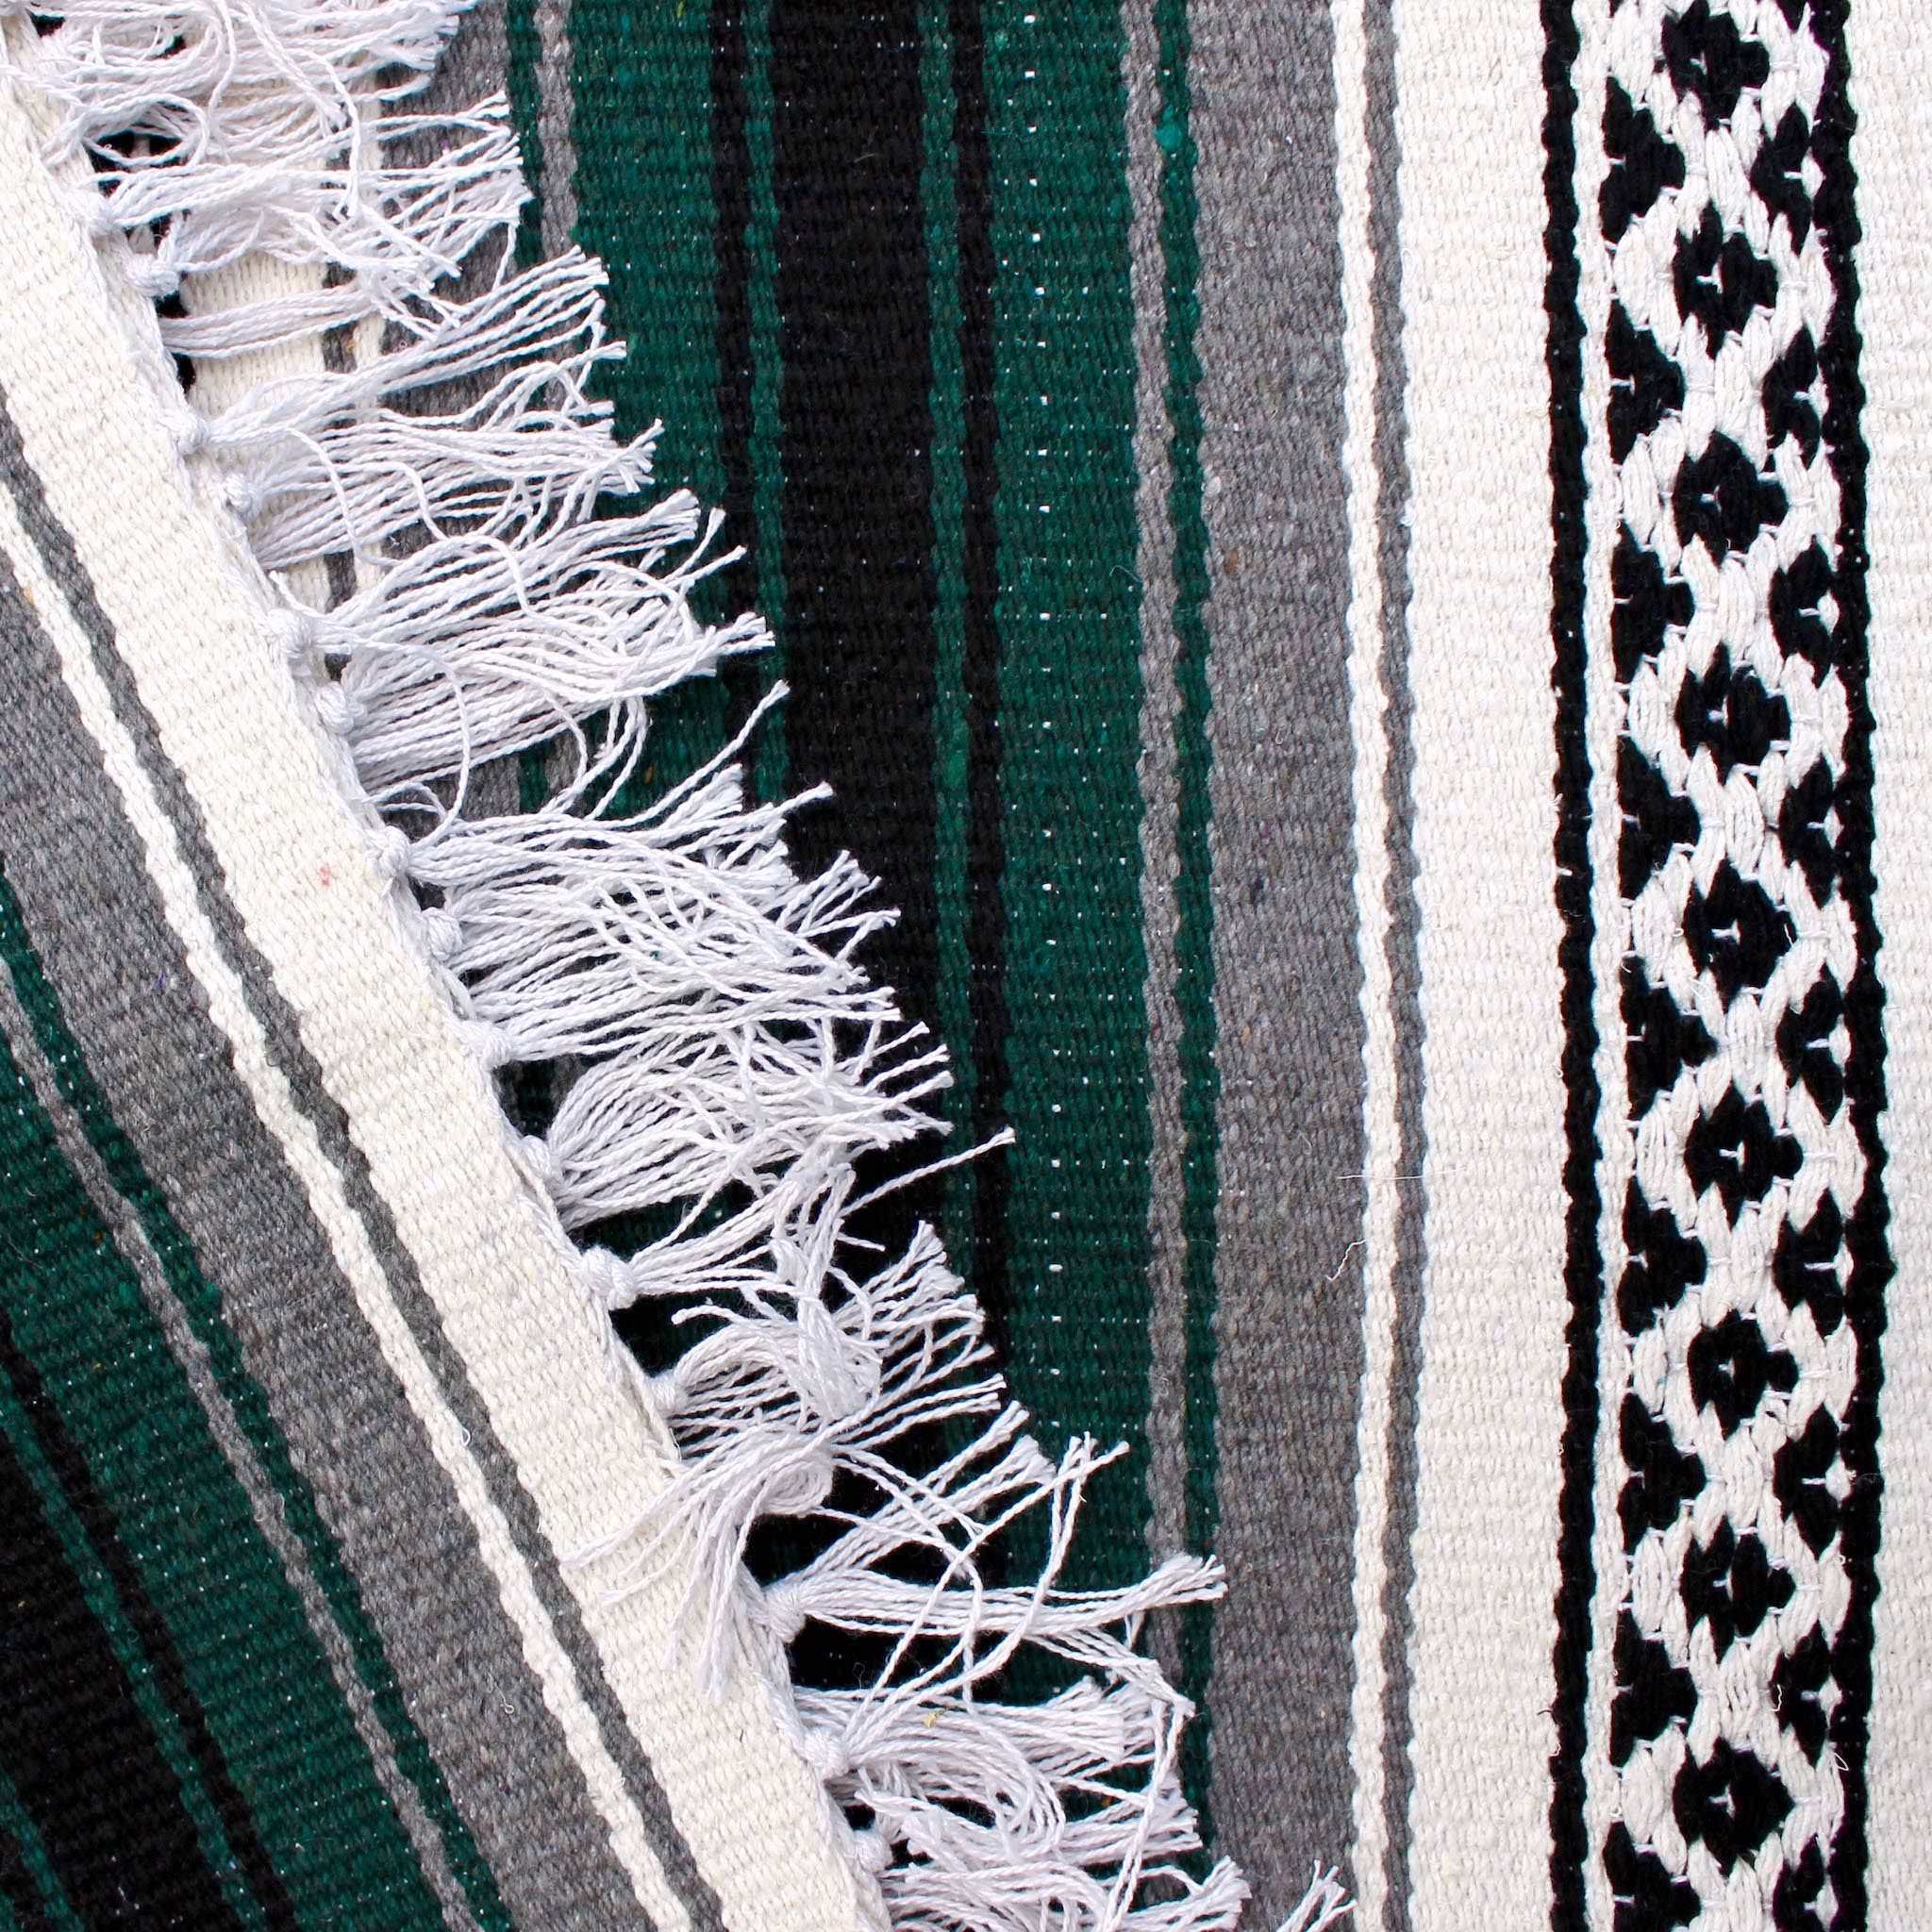 Close-up of blanket woven with alternating solid stripes in white, black, grey and hunter green, and white stripe with pattern of small black diamonds, edge of blanket has white fringe.